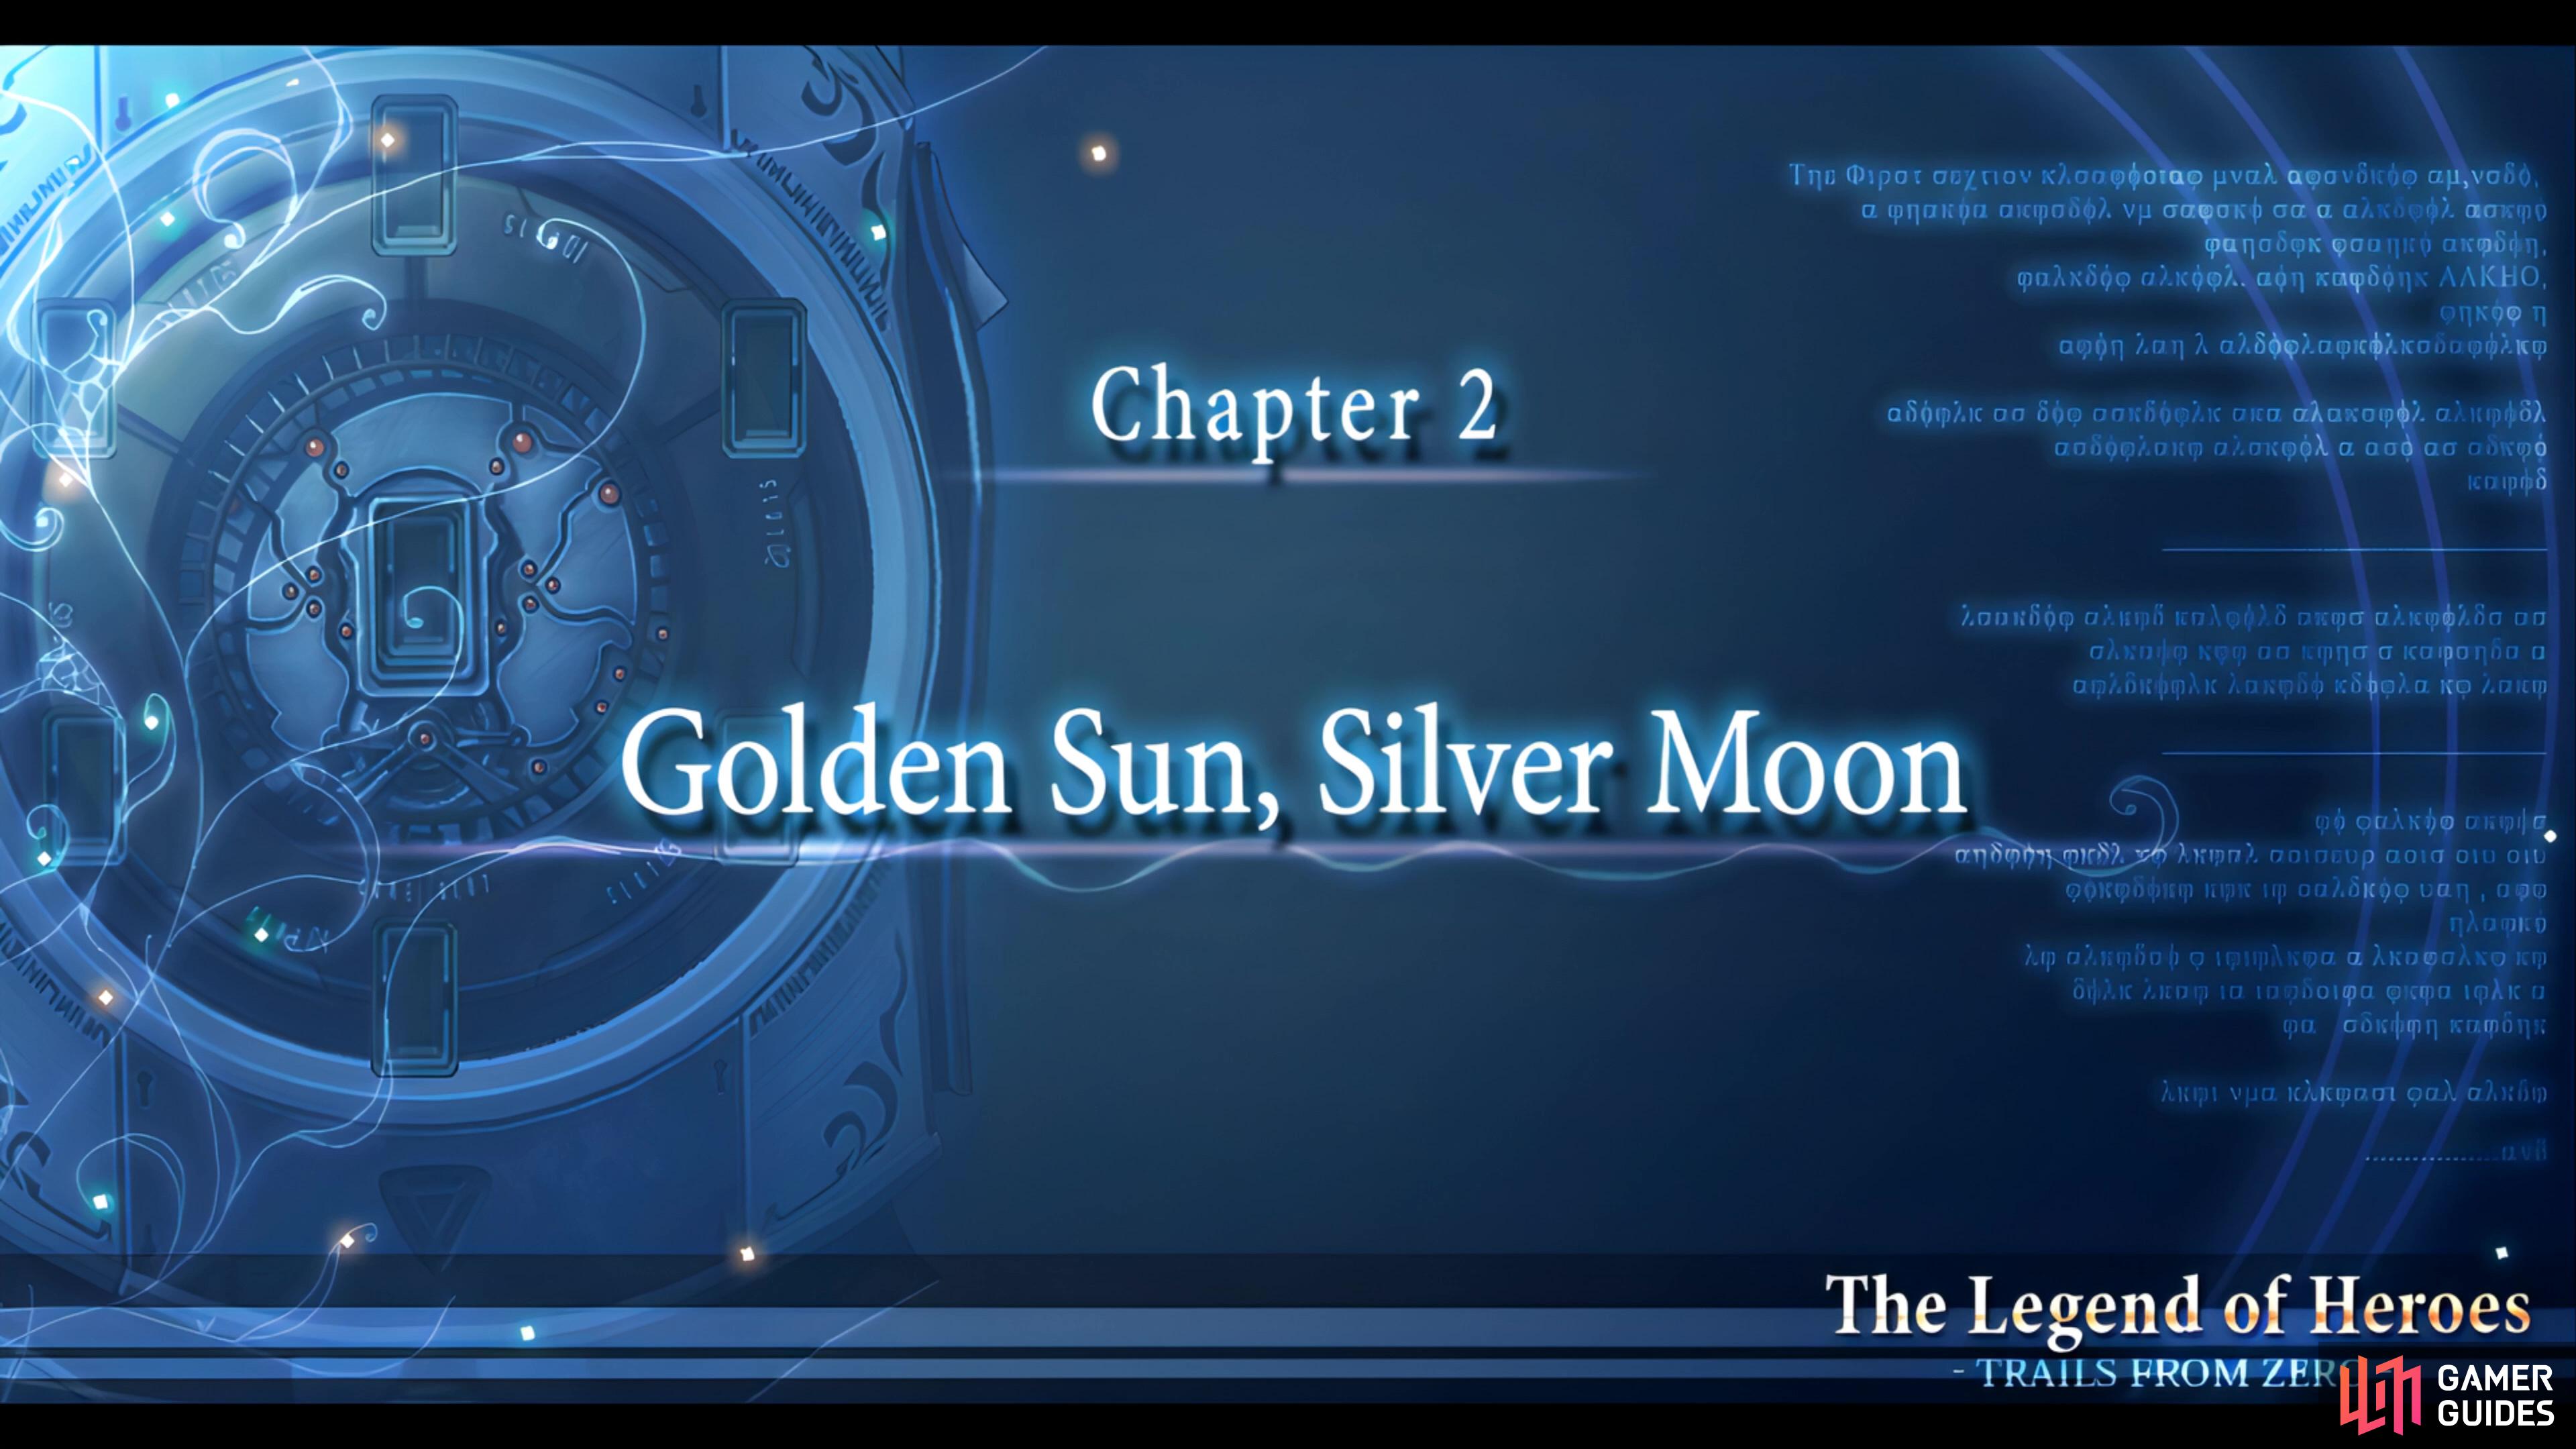 Golden Sun, Silver Moon is the name for Chapter 2 in Trails from Zero.